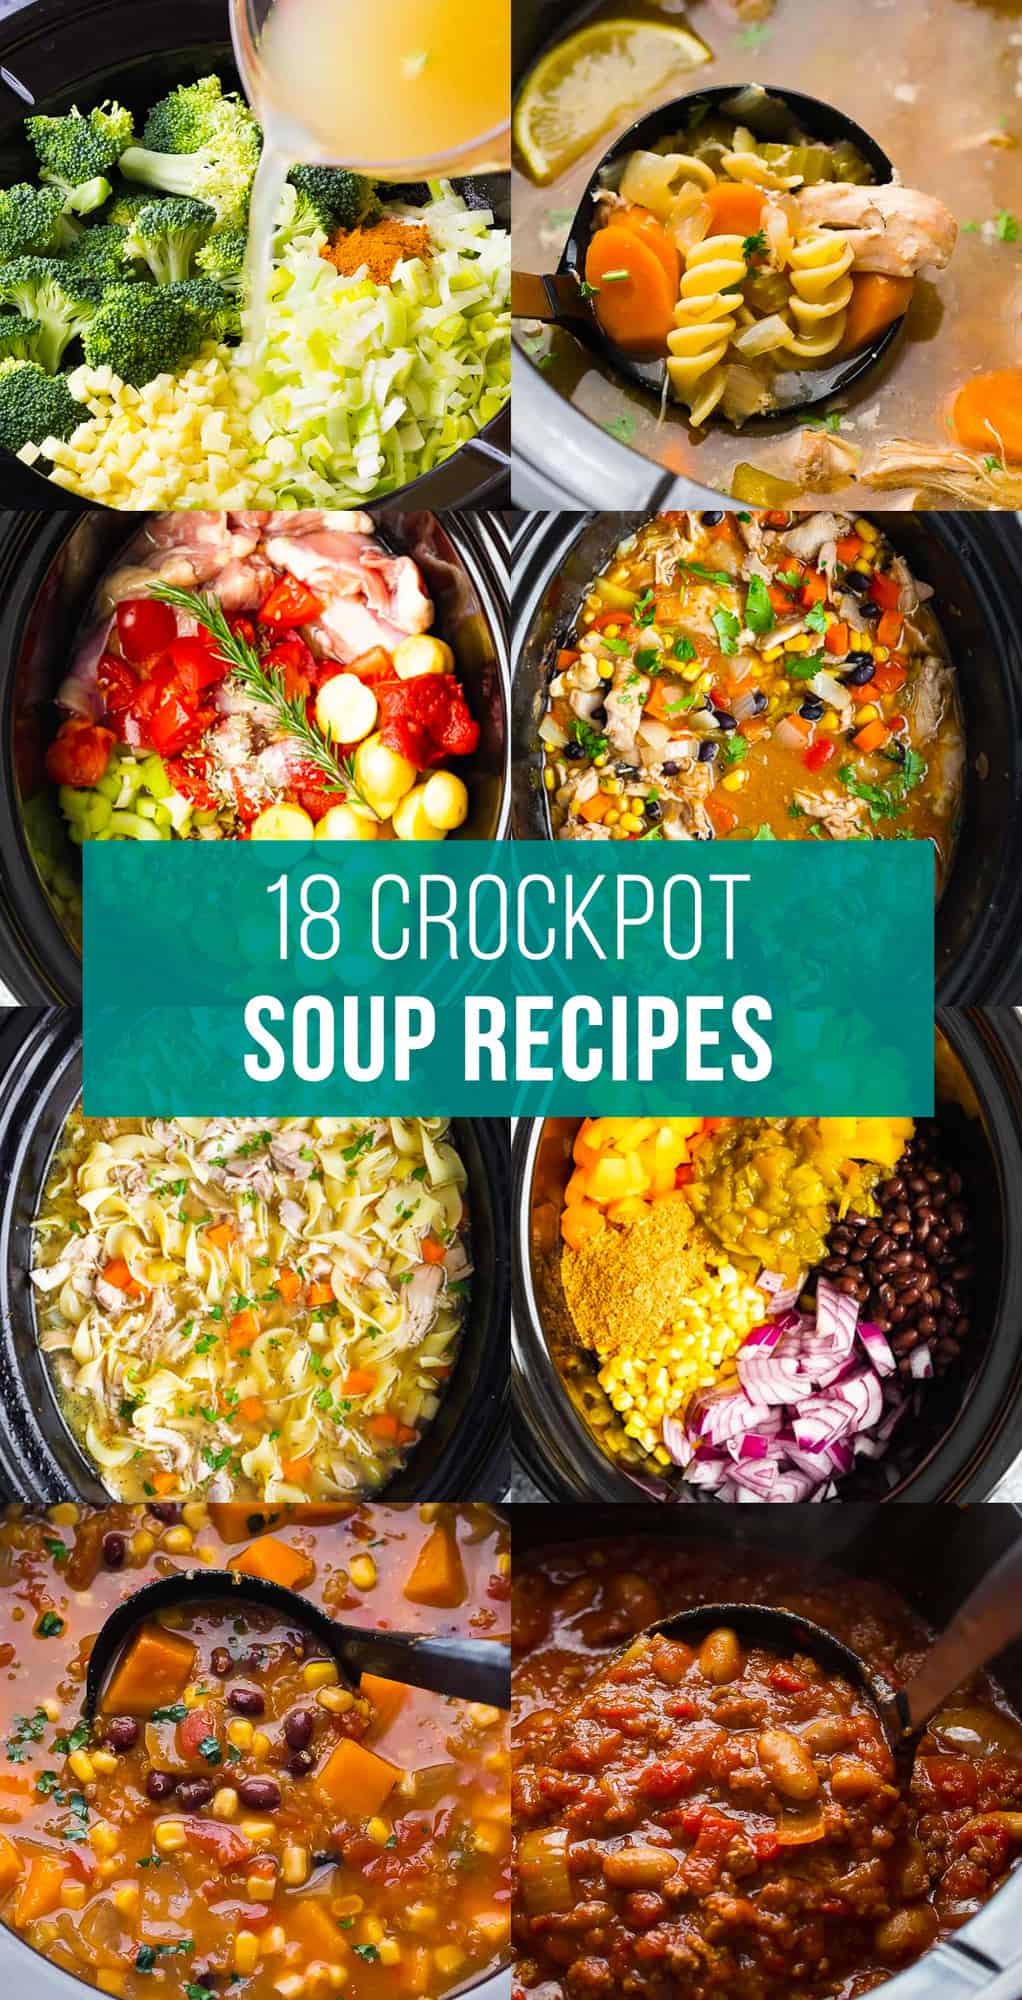 composite image with 8 overhead photos of different soup recipes in crockpot, with text "18 crockpot soup recipes"